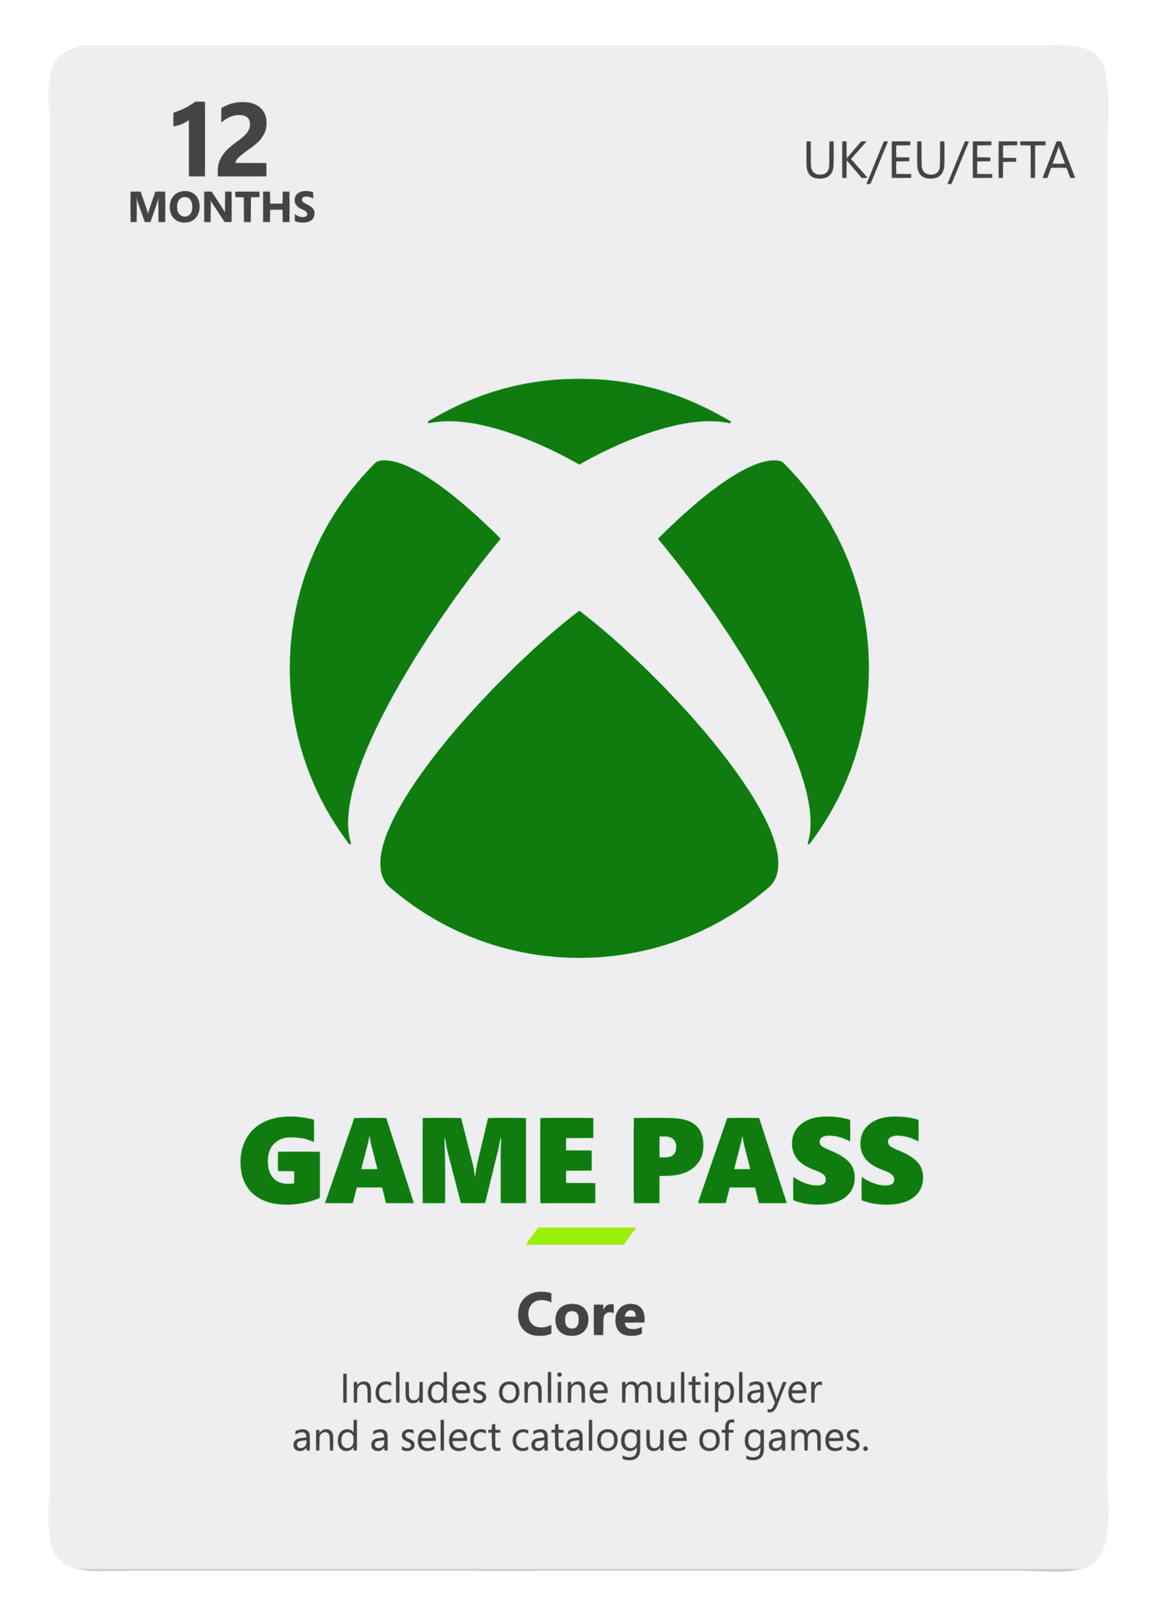 Xbox Game Pass Ultimate 12 months for a good price!